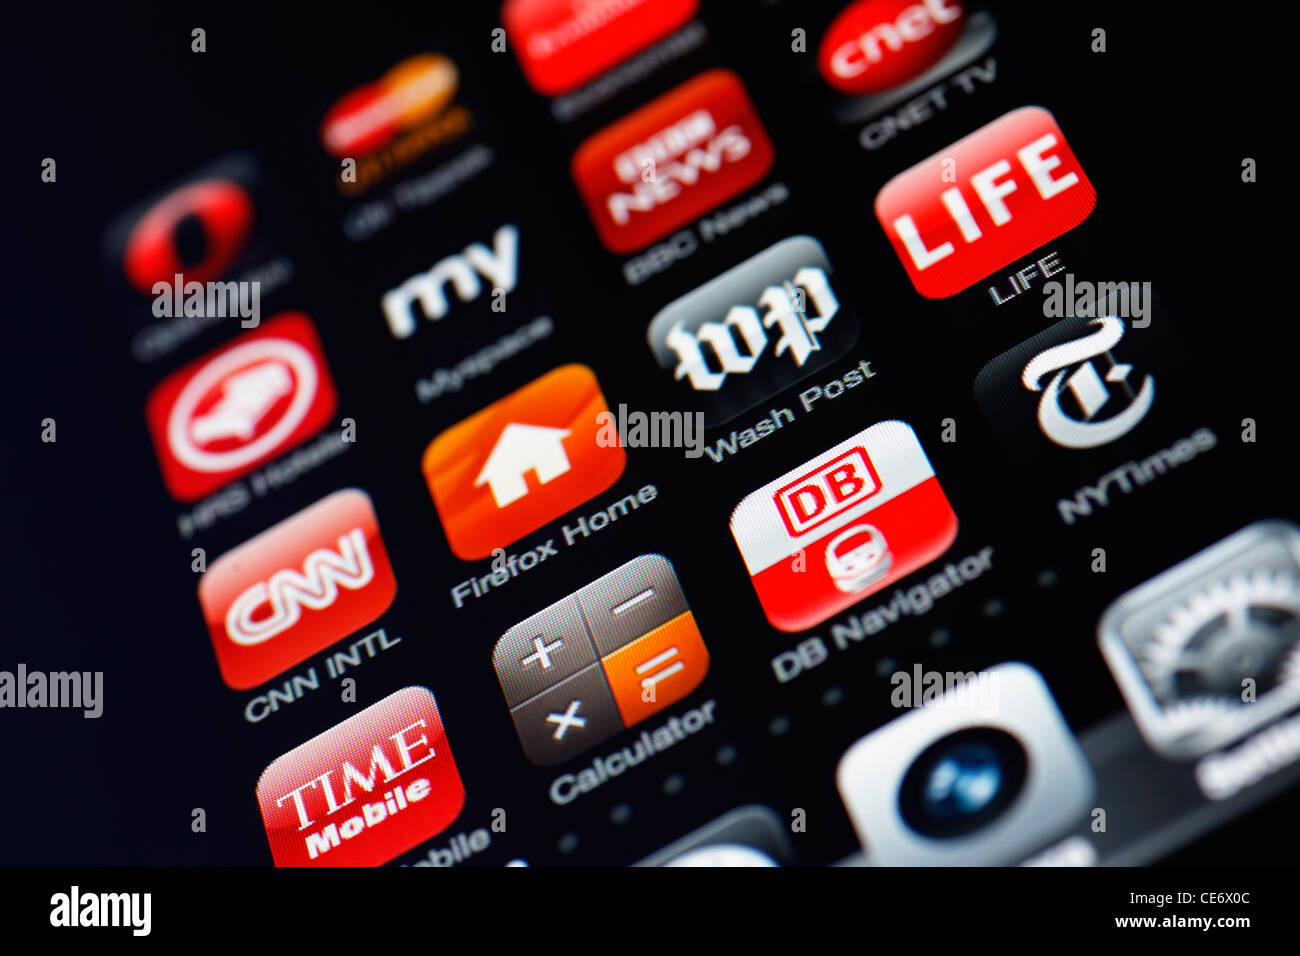 Muenster, Germany, January 26, 2012: Image of the iphone touch screen. Display shows a collection of useful apps with red color Stock Photo